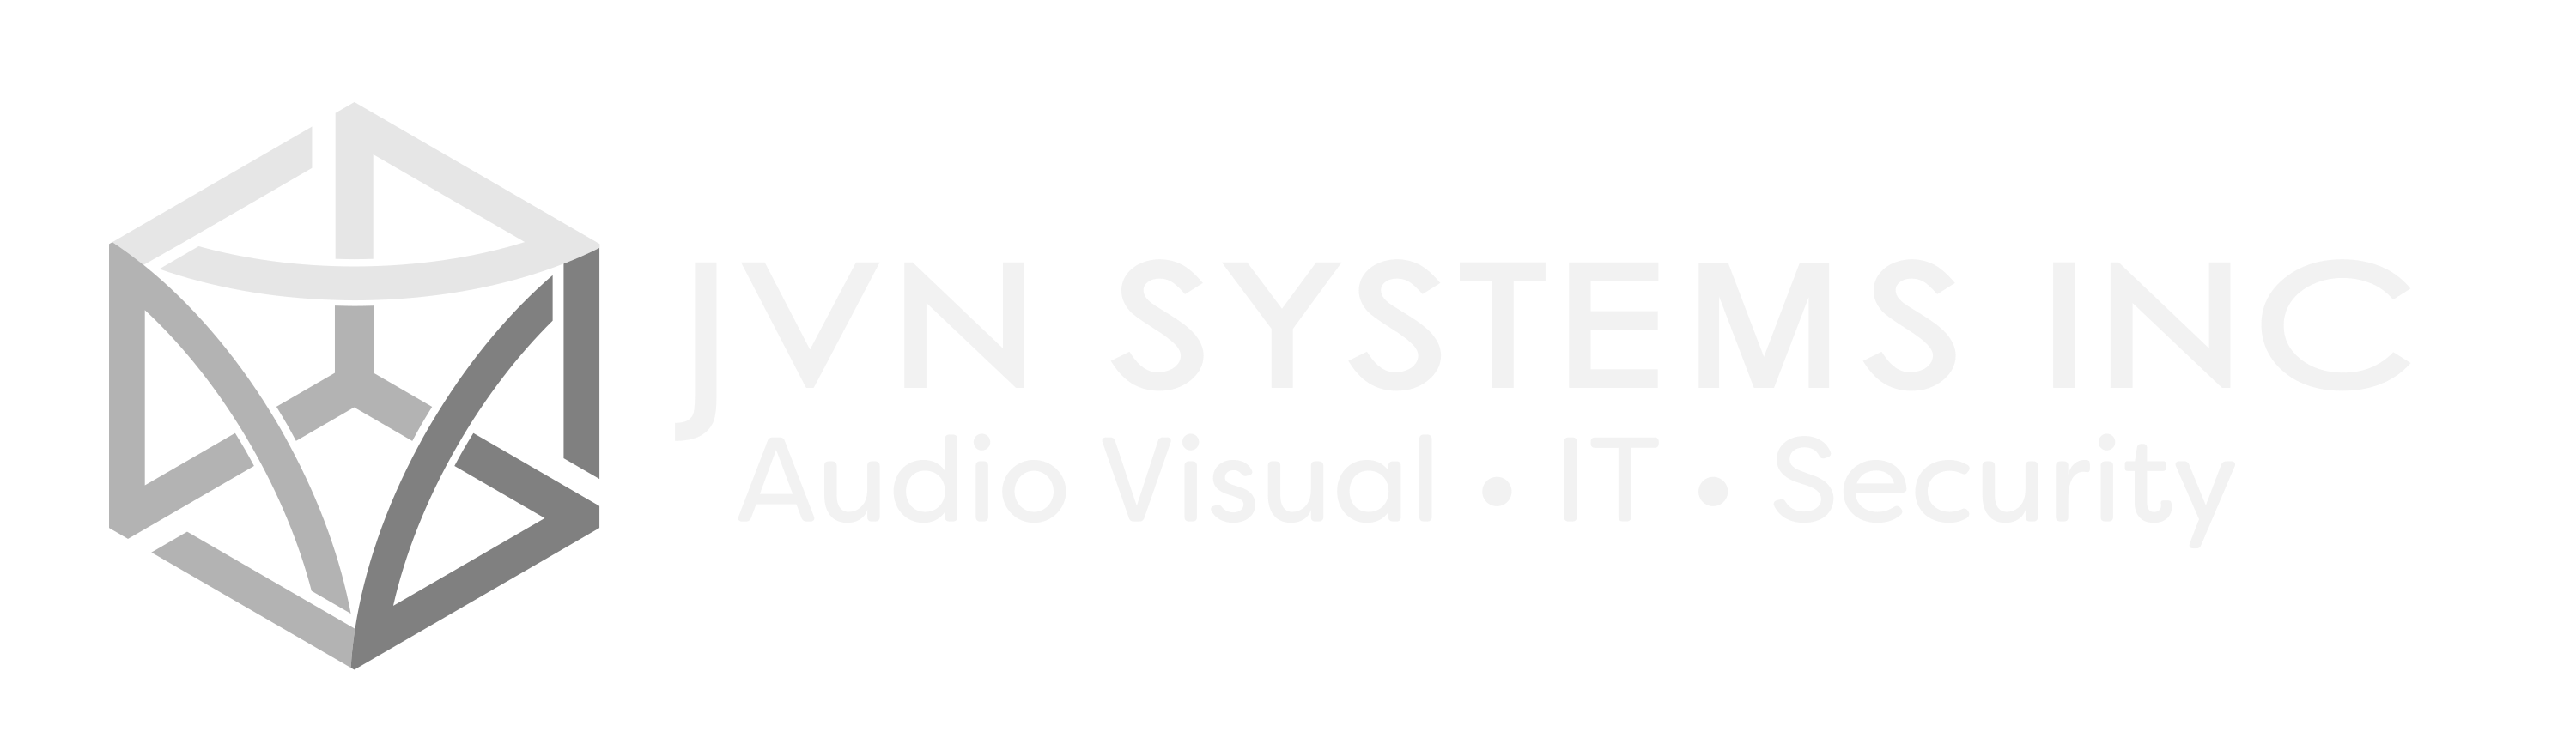 JVN Systems Inc.